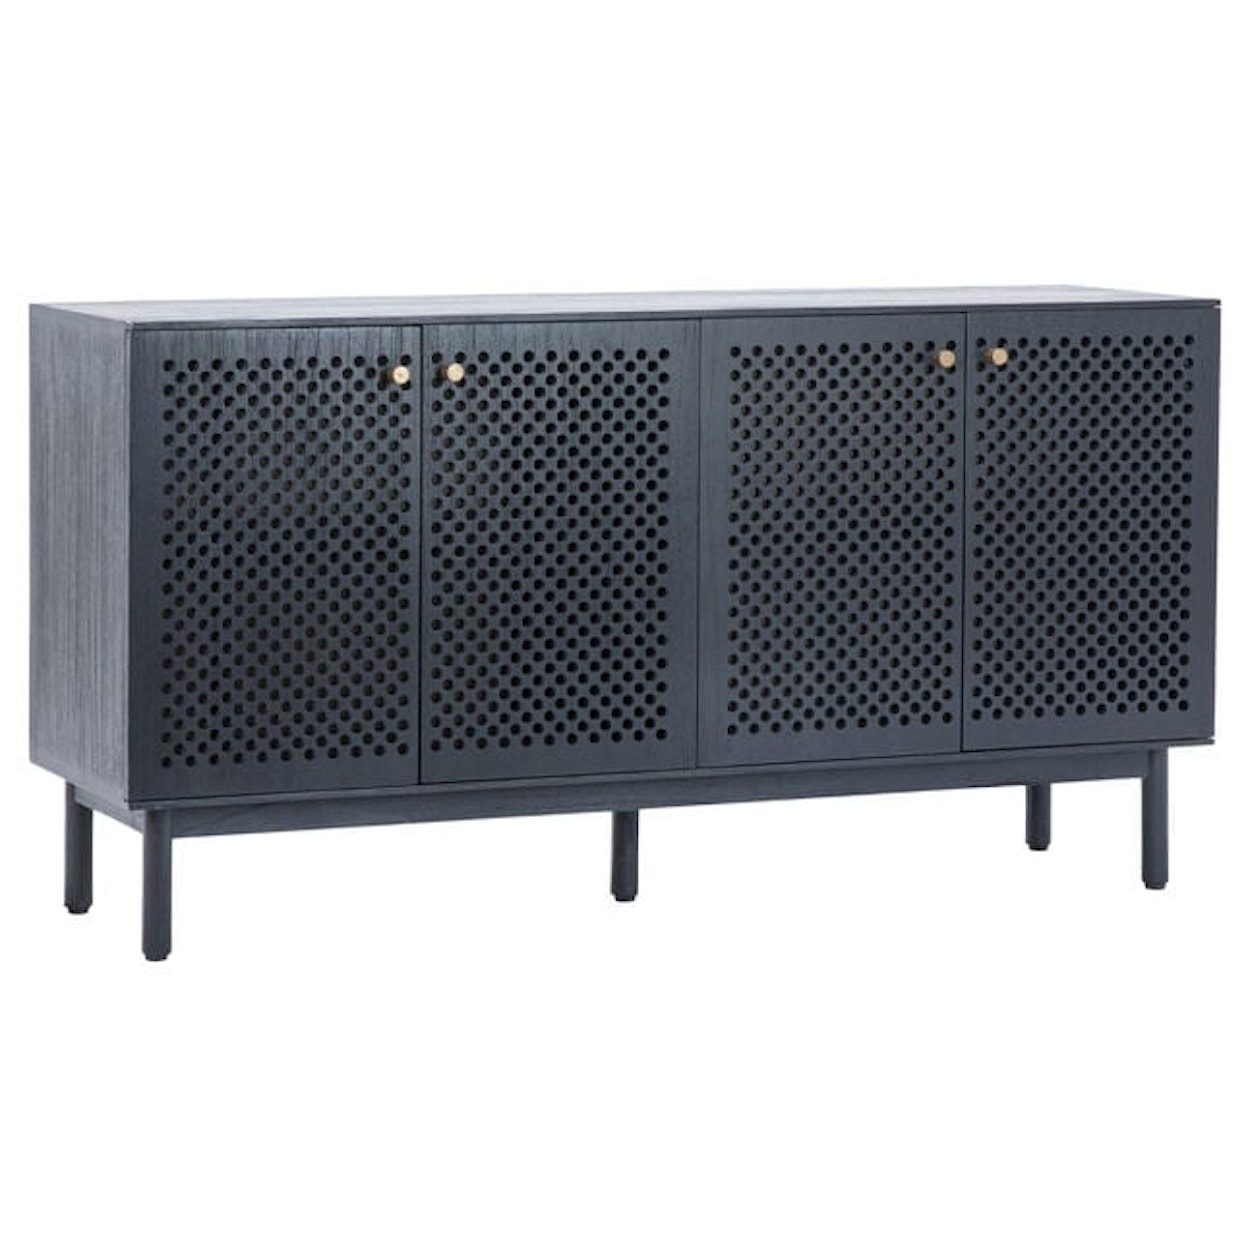 Dovetail Furniture Casegood Accent Marquez Sideboard